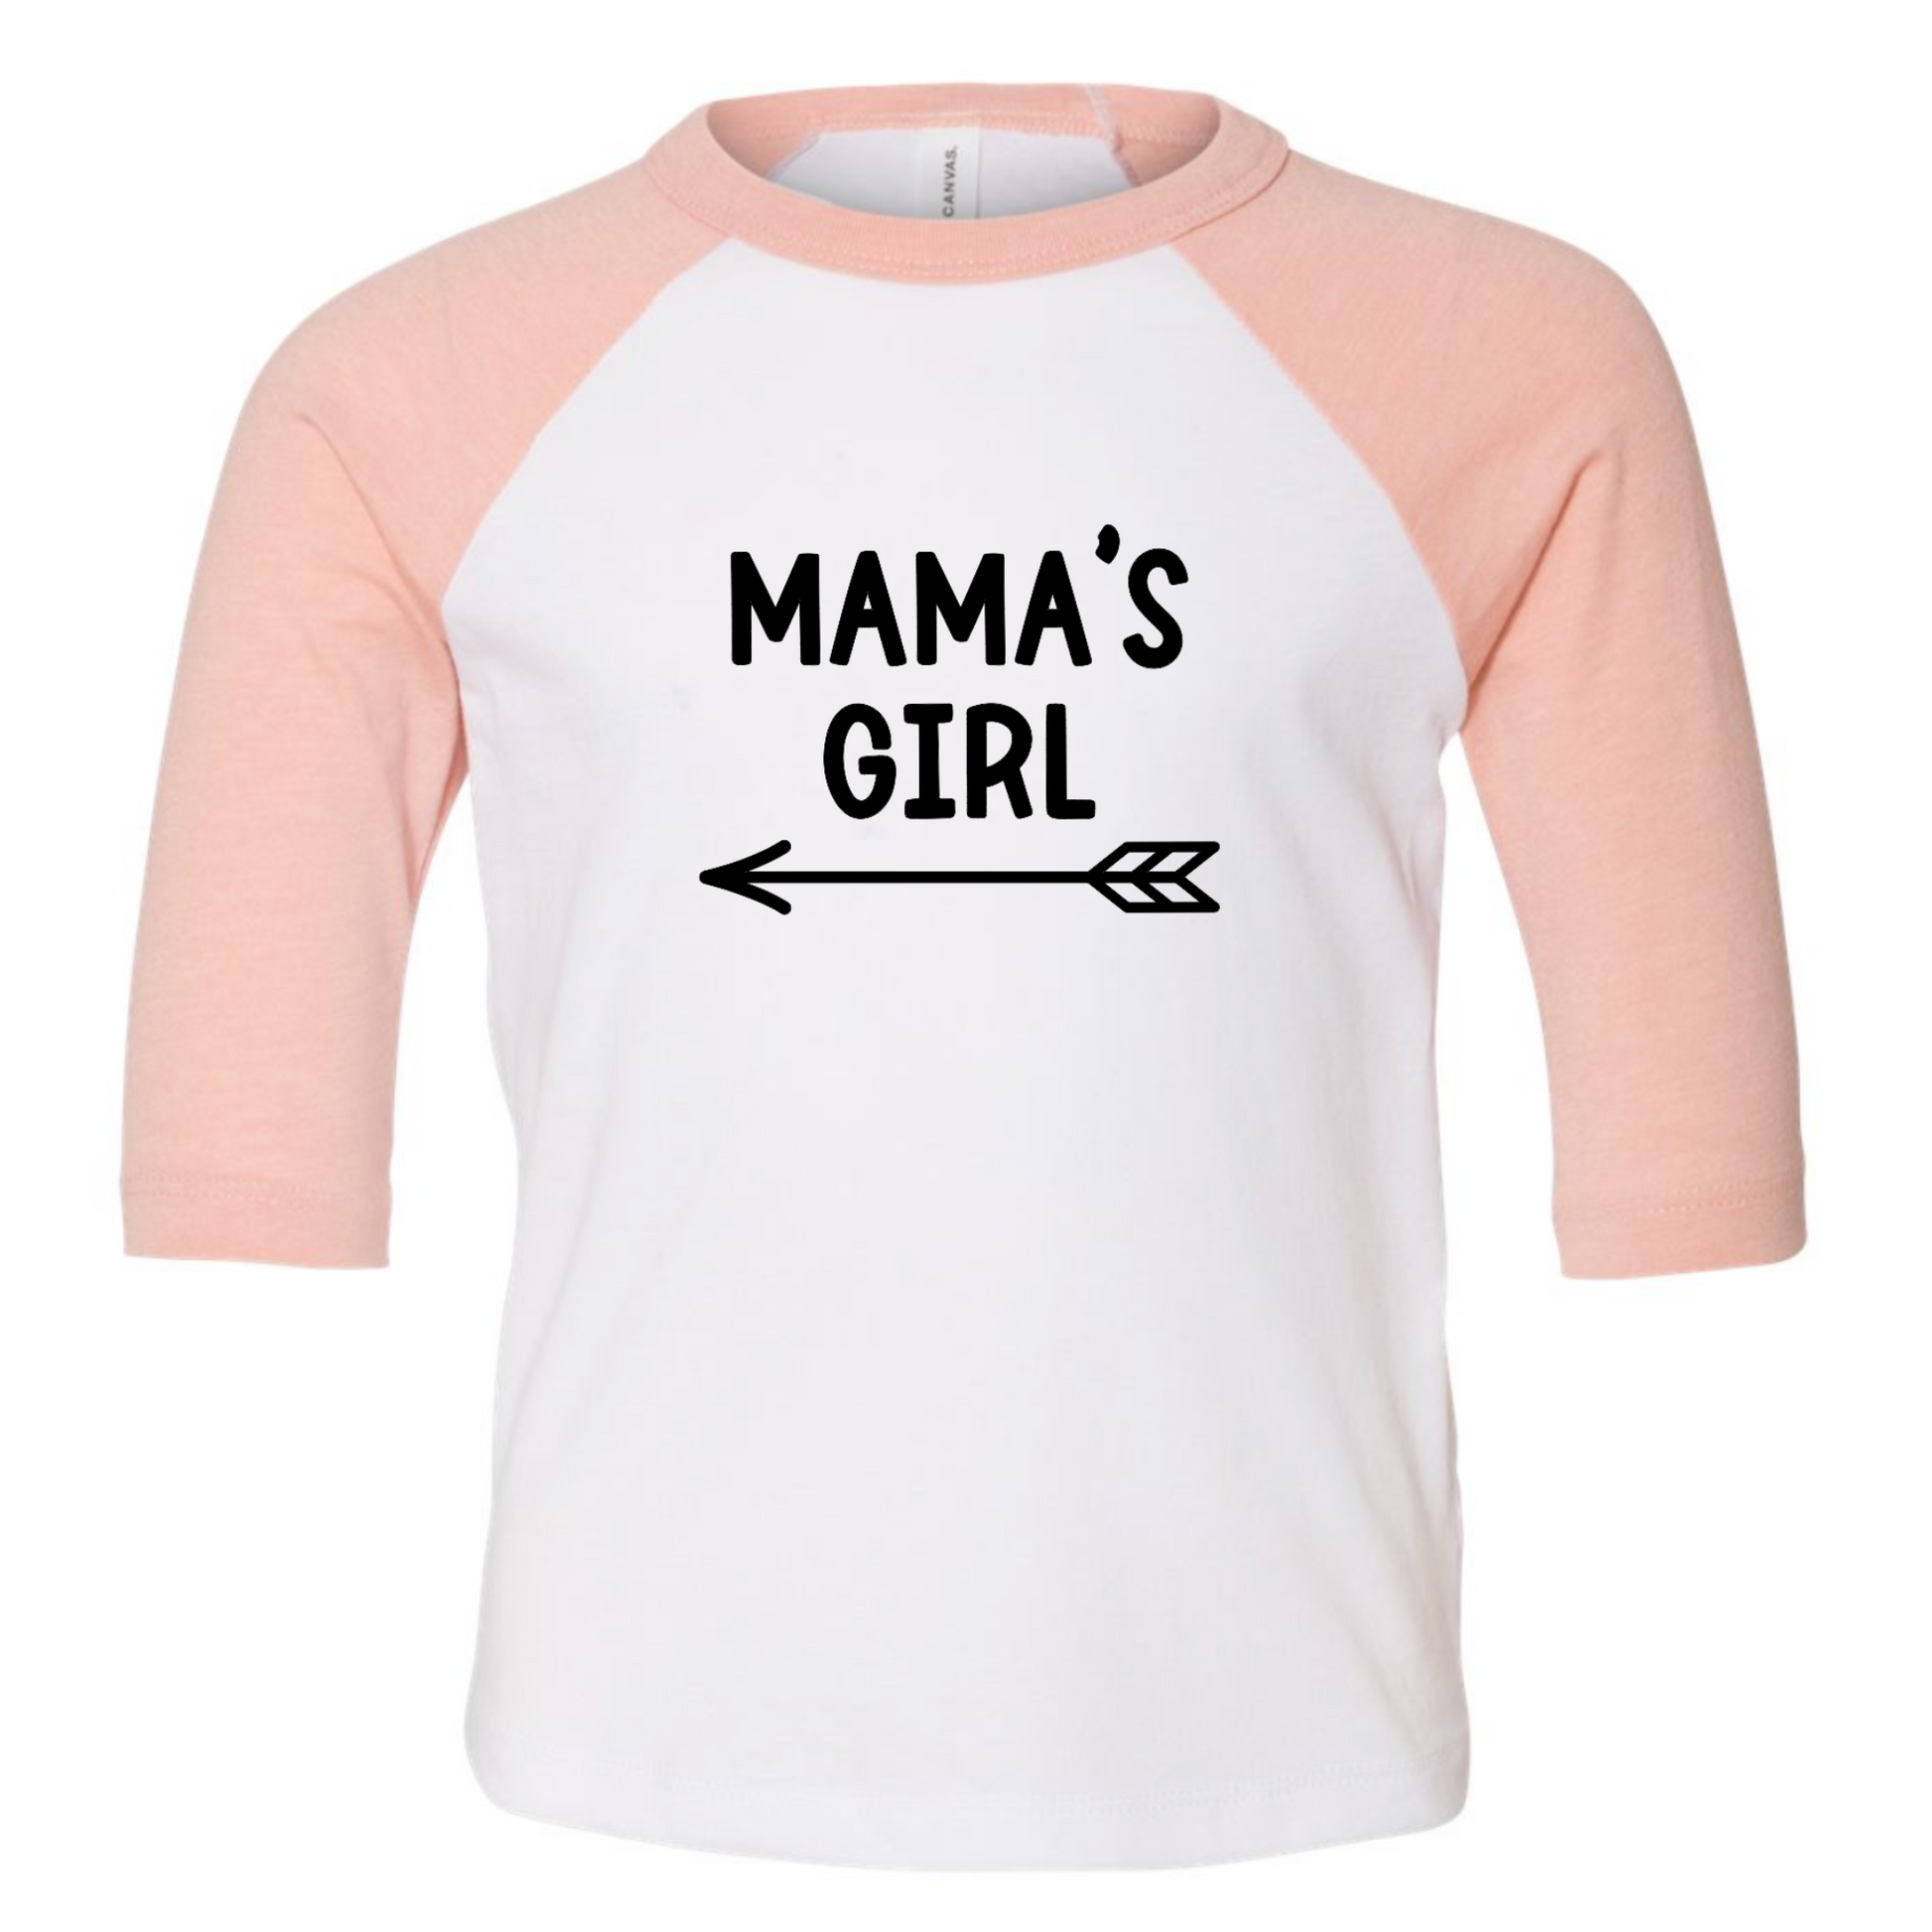 Mama's Girl - Three Quarter Sleeve T-Shirt. Sleeves are heather peach and base is white with the Mama's Girl writing in black with a cute arrow pointing to the left underneath. This is the front view of the shirt.